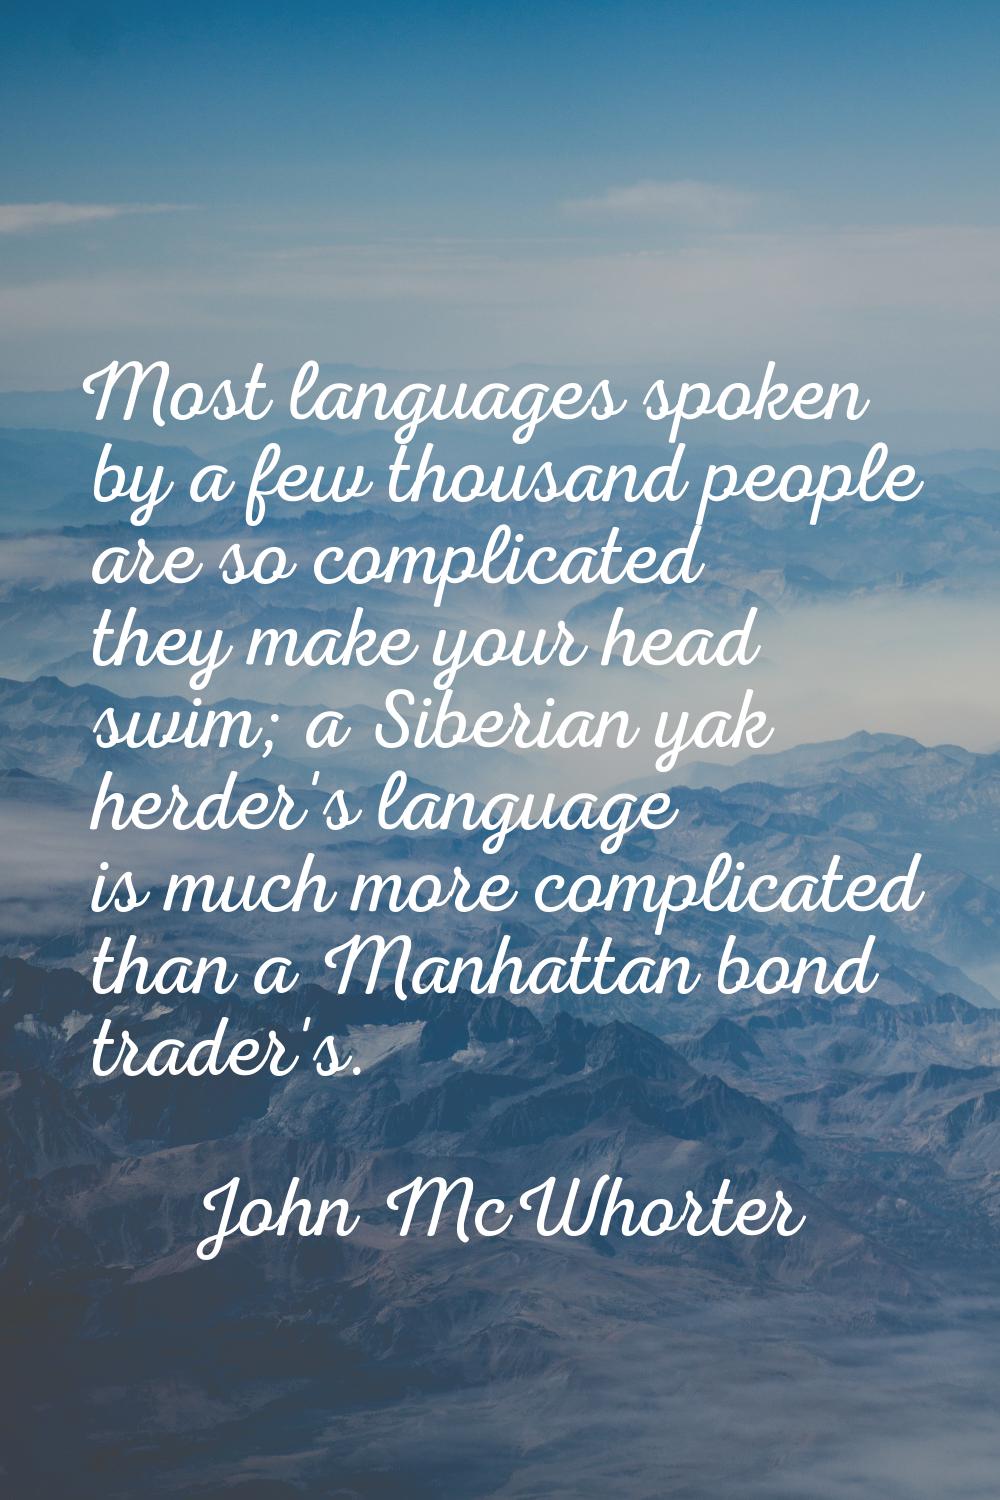 Most languages spoken by a few thousand people are so complicated they make your head swim; a Siber